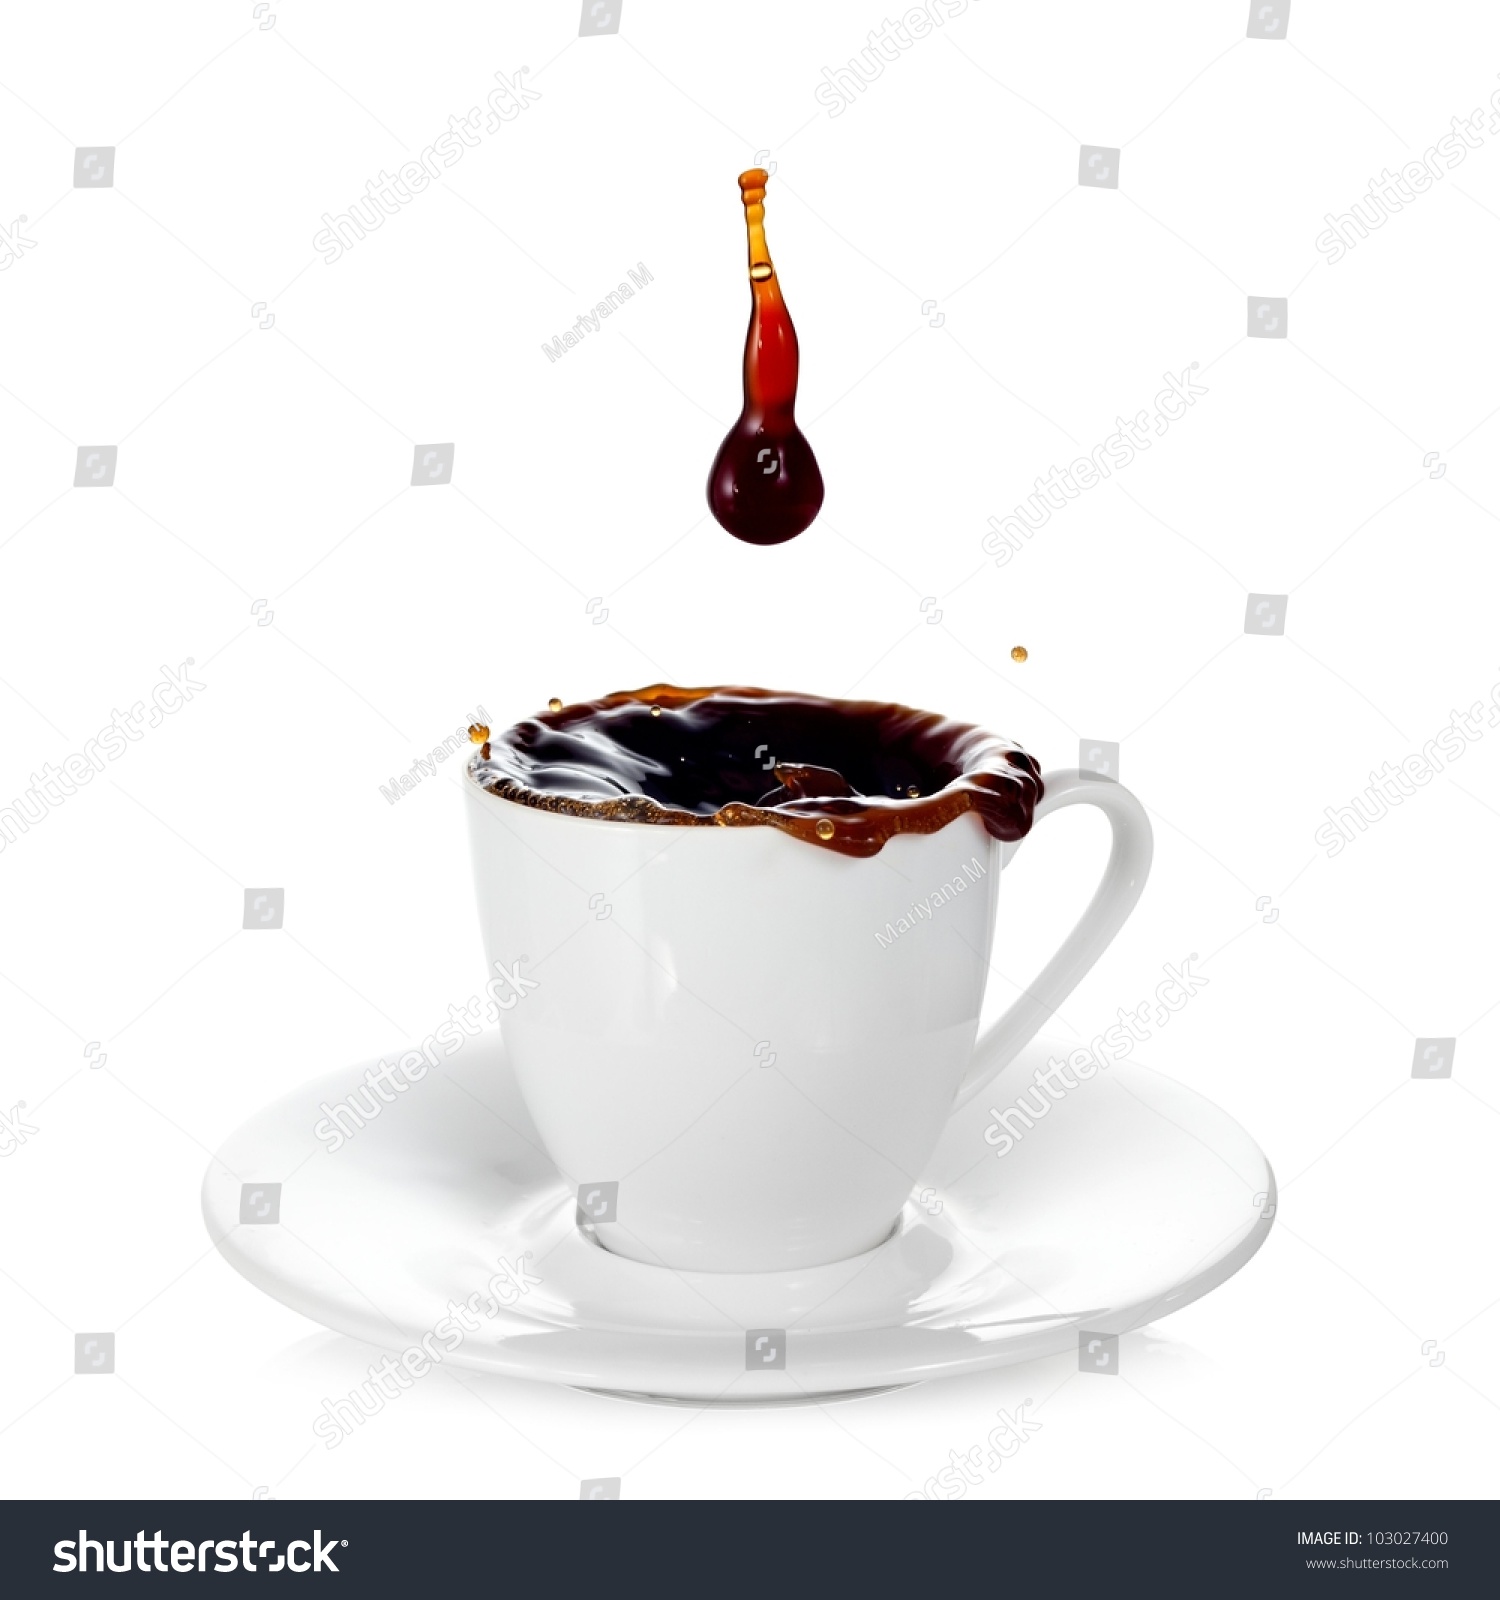 Coffee Cup Plash Drop Stock Photo (Safe to Use) 103027400 - Shutterstock